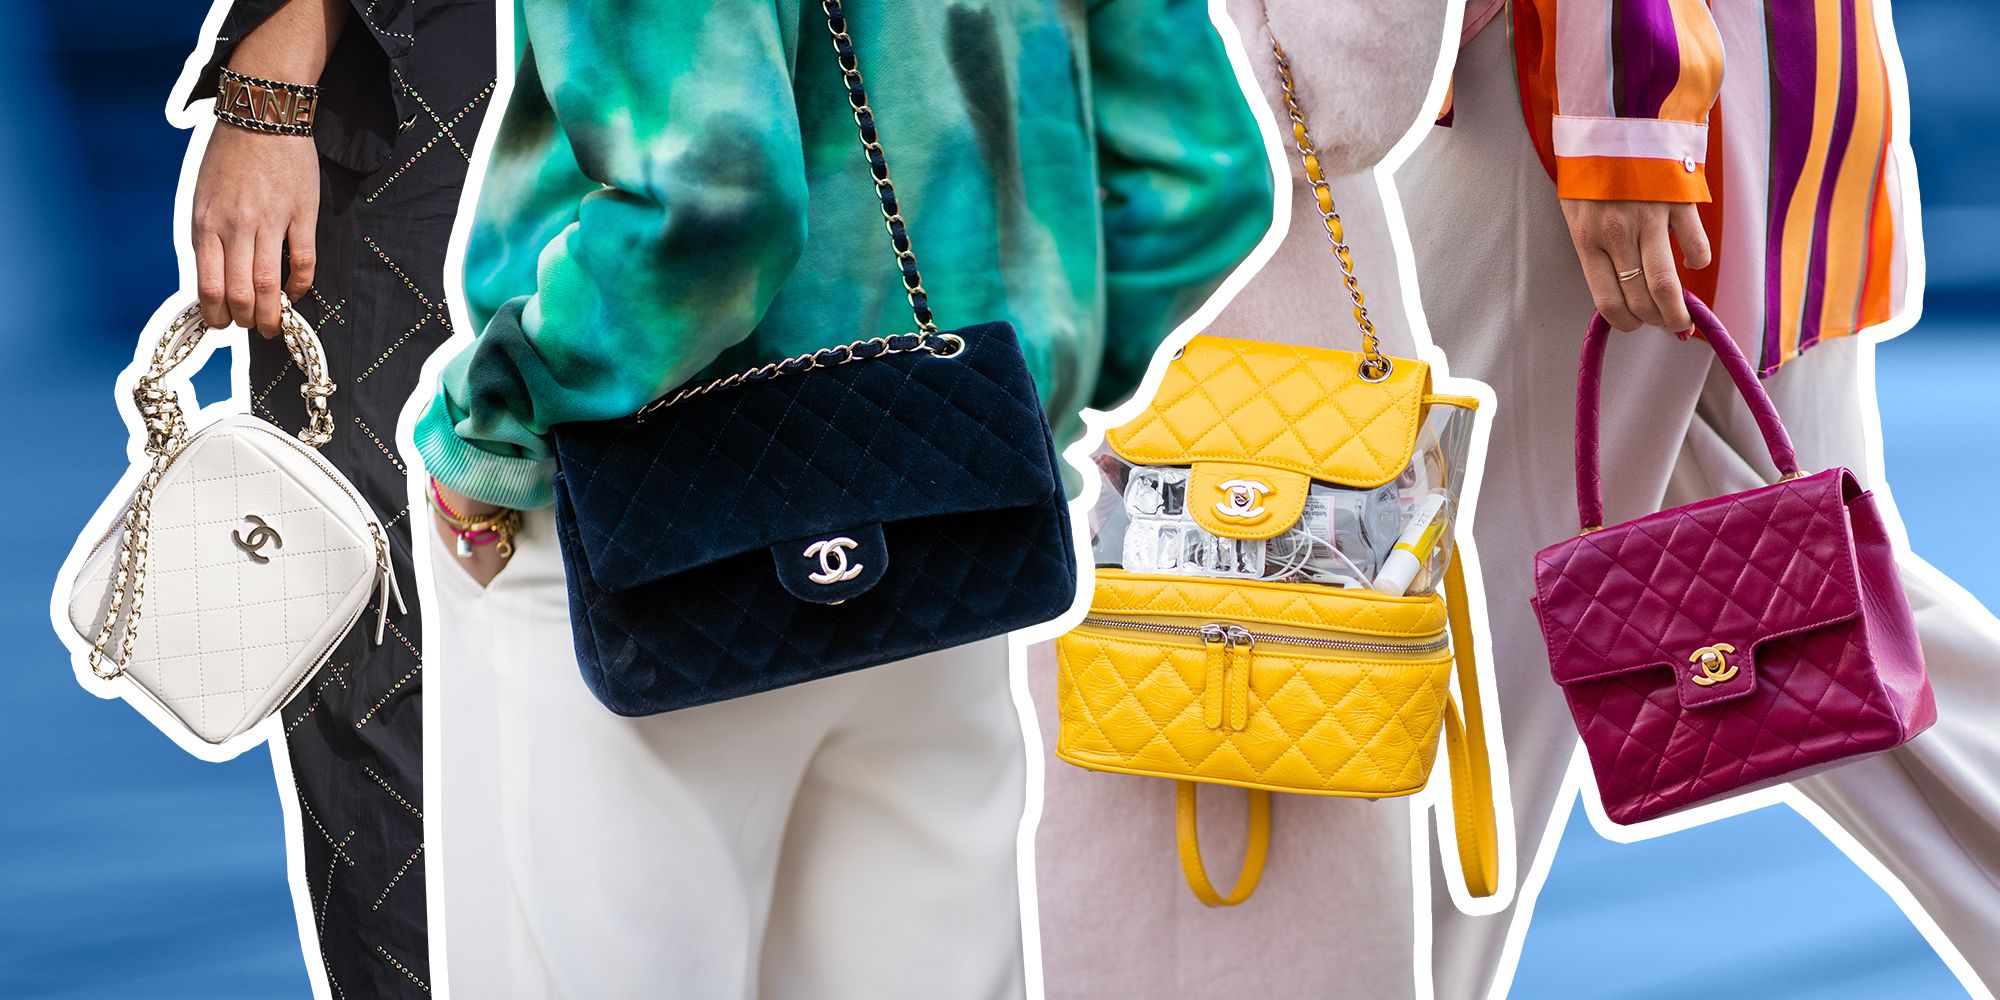 Chanel 22 the maisons latest handbag is an edgy homage to the houses  classic French style